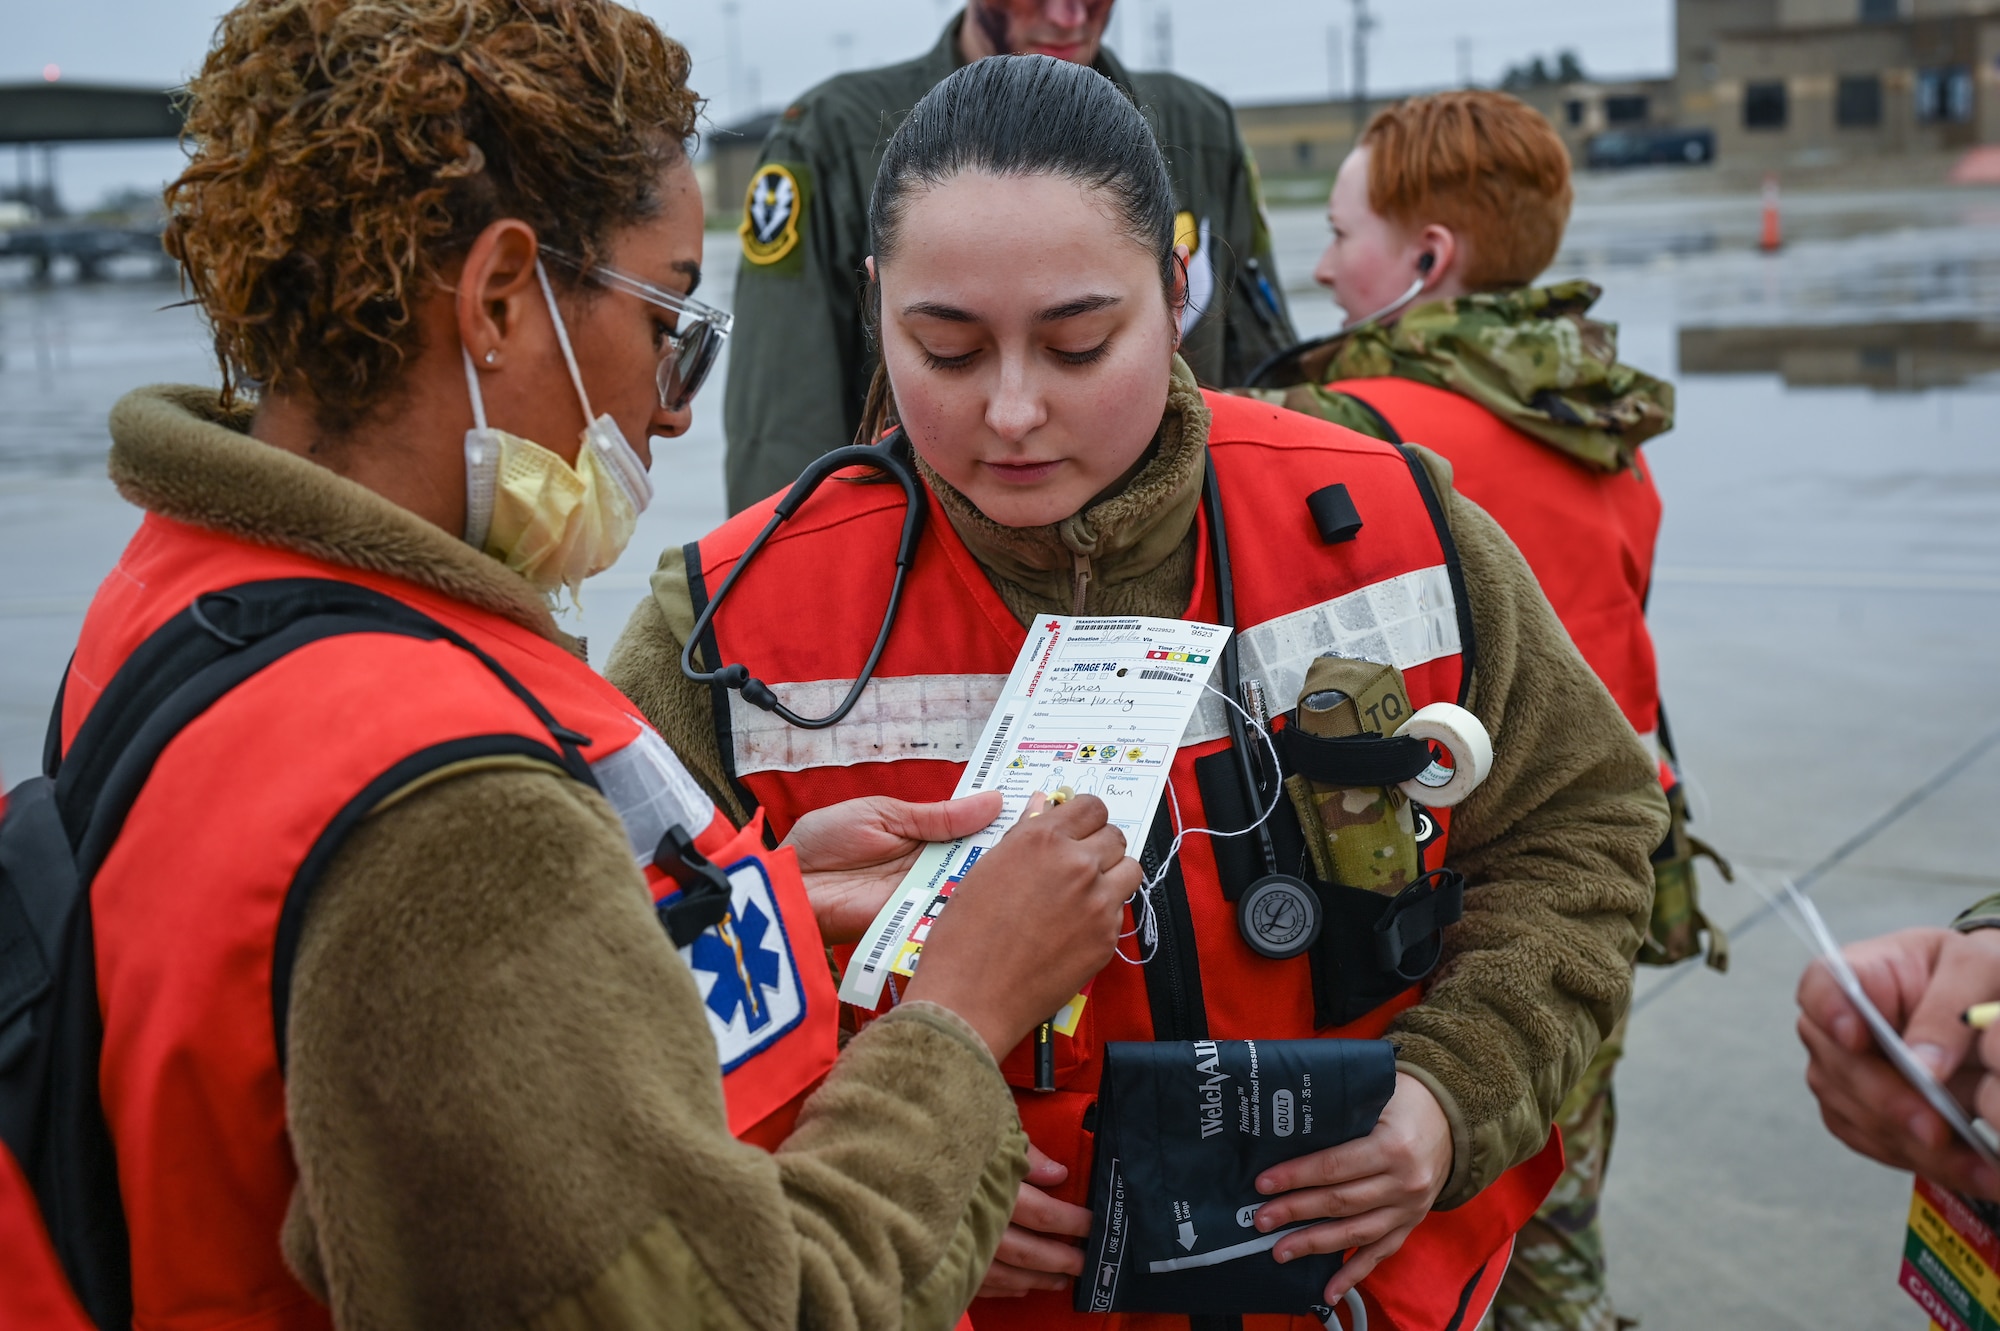 U.S. Air Force Airman 1st Class Ashley Beausoleil (left), 47th Medical Group health services management, and Senior Airman Madison Vega (right), 47th MDG family medicine technician fill out patient injury cards during a Major Accident Response Exercise (MARE) on the flight line at Laughlin Air Force Base, Texas, Dec. 14, 2023.